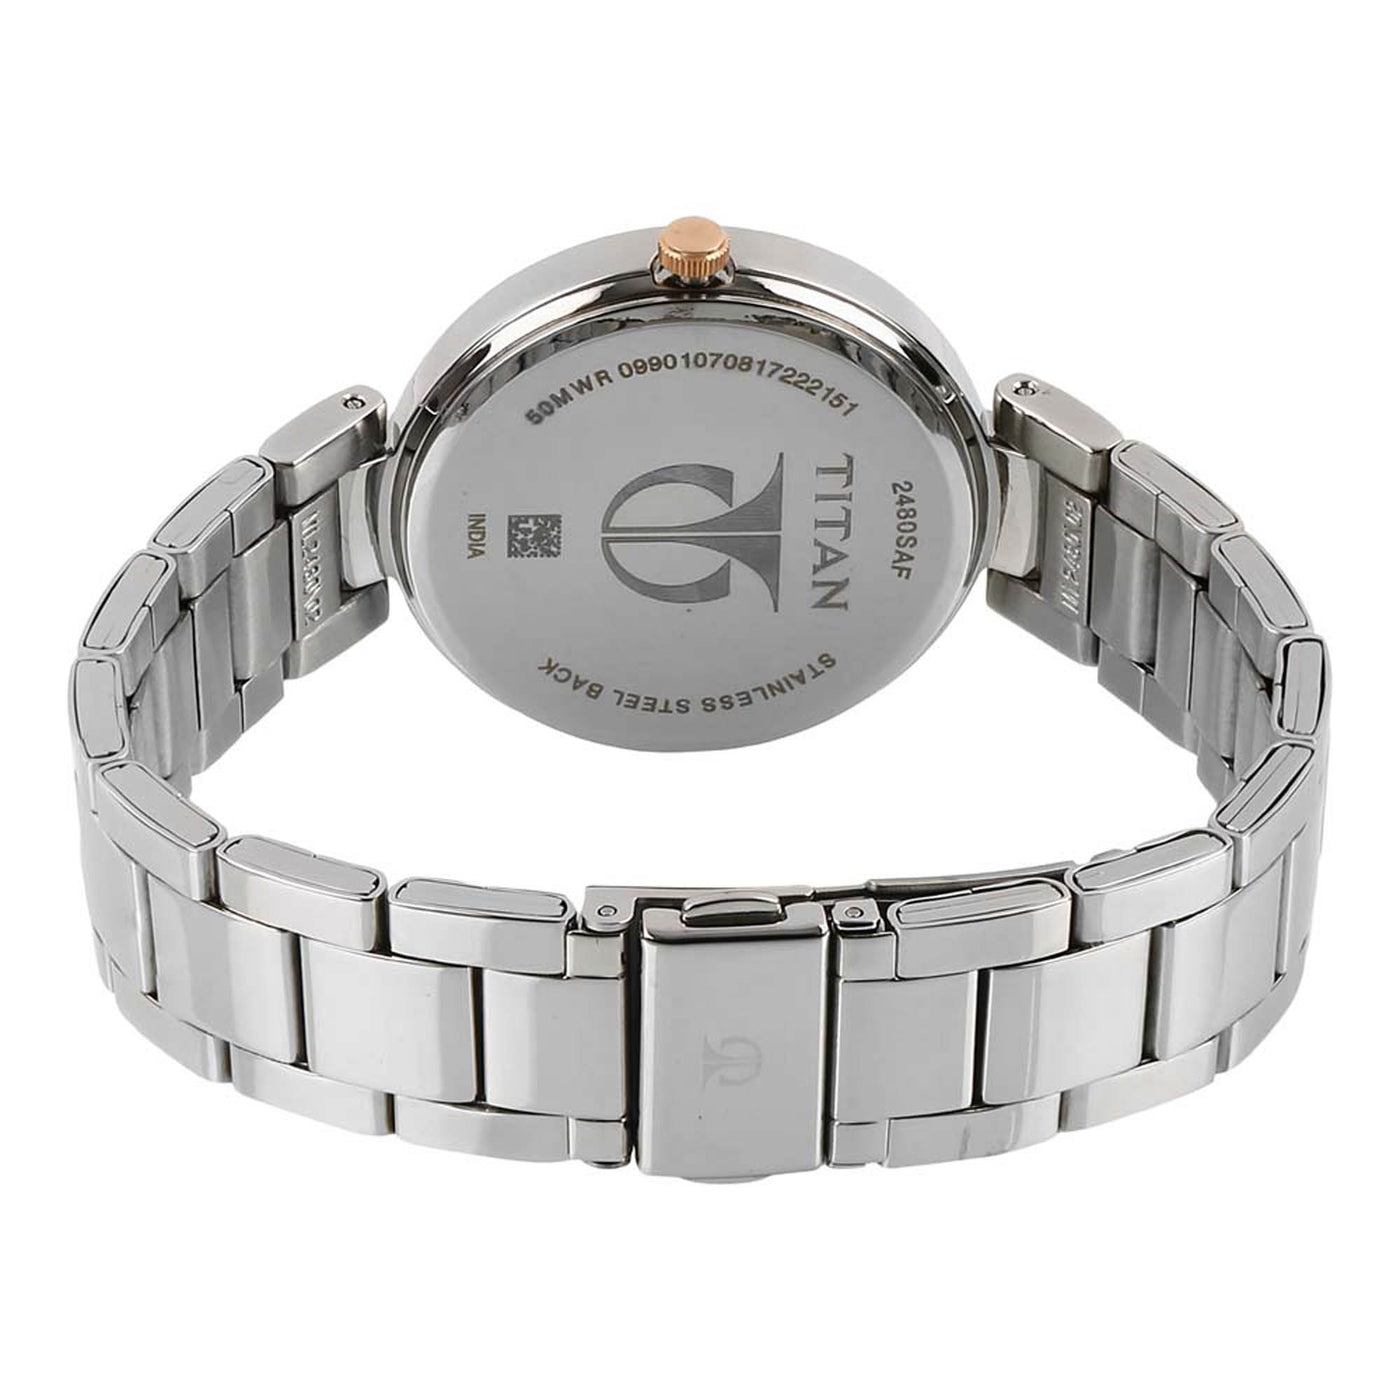 Neo Date 35mm Stainless Steel Band